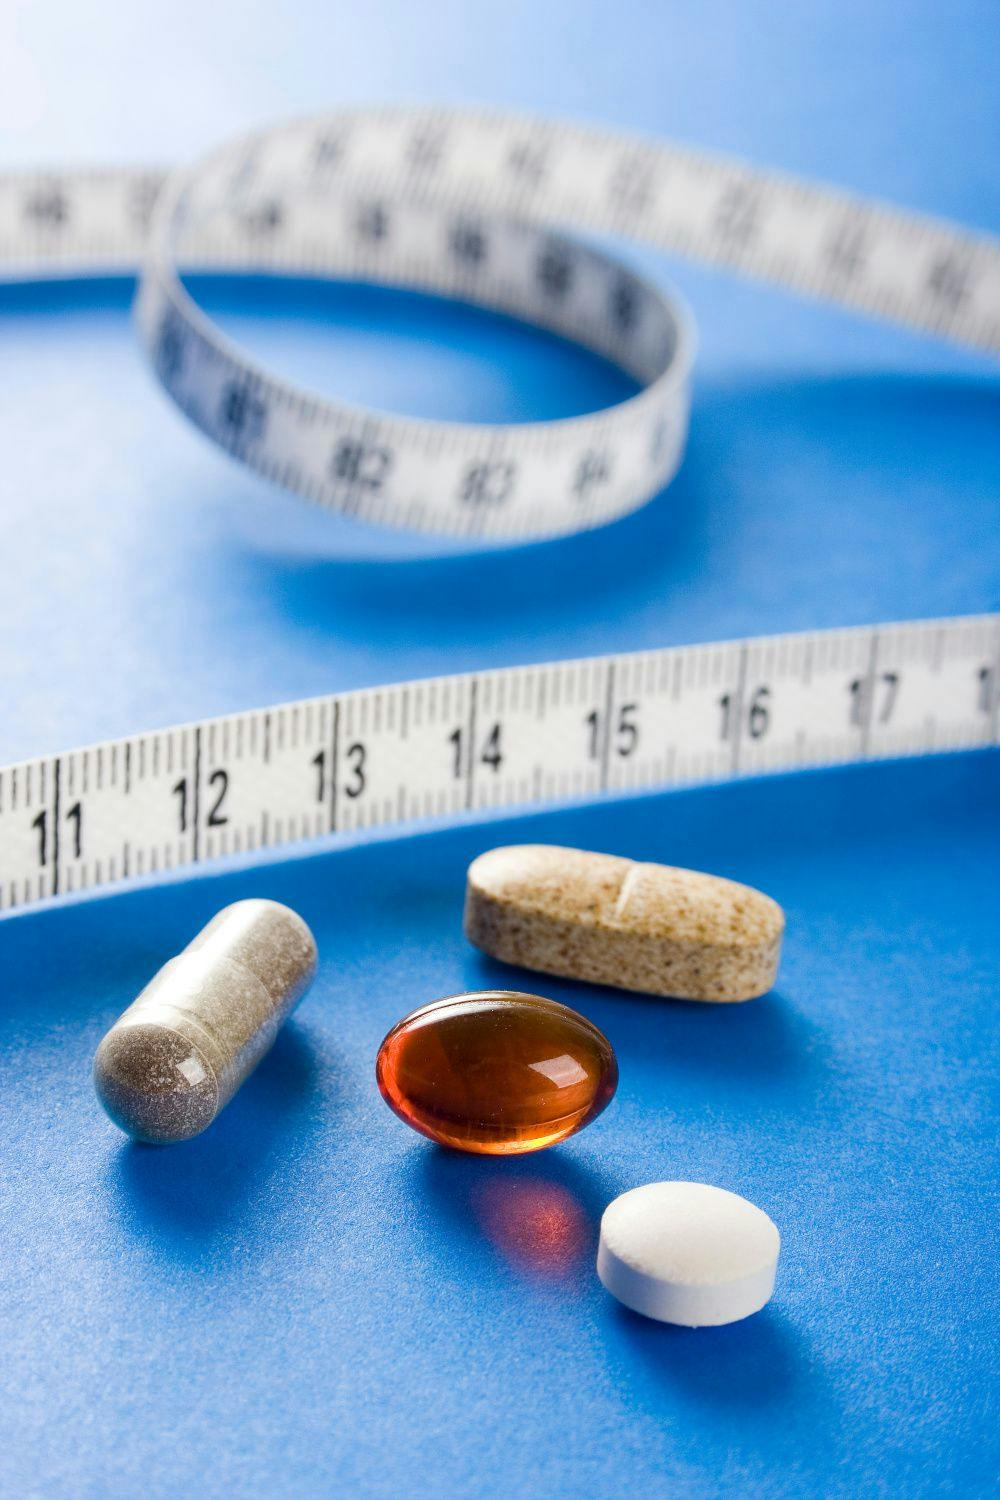 Weight-management market focuses on holistic health and positive messaging